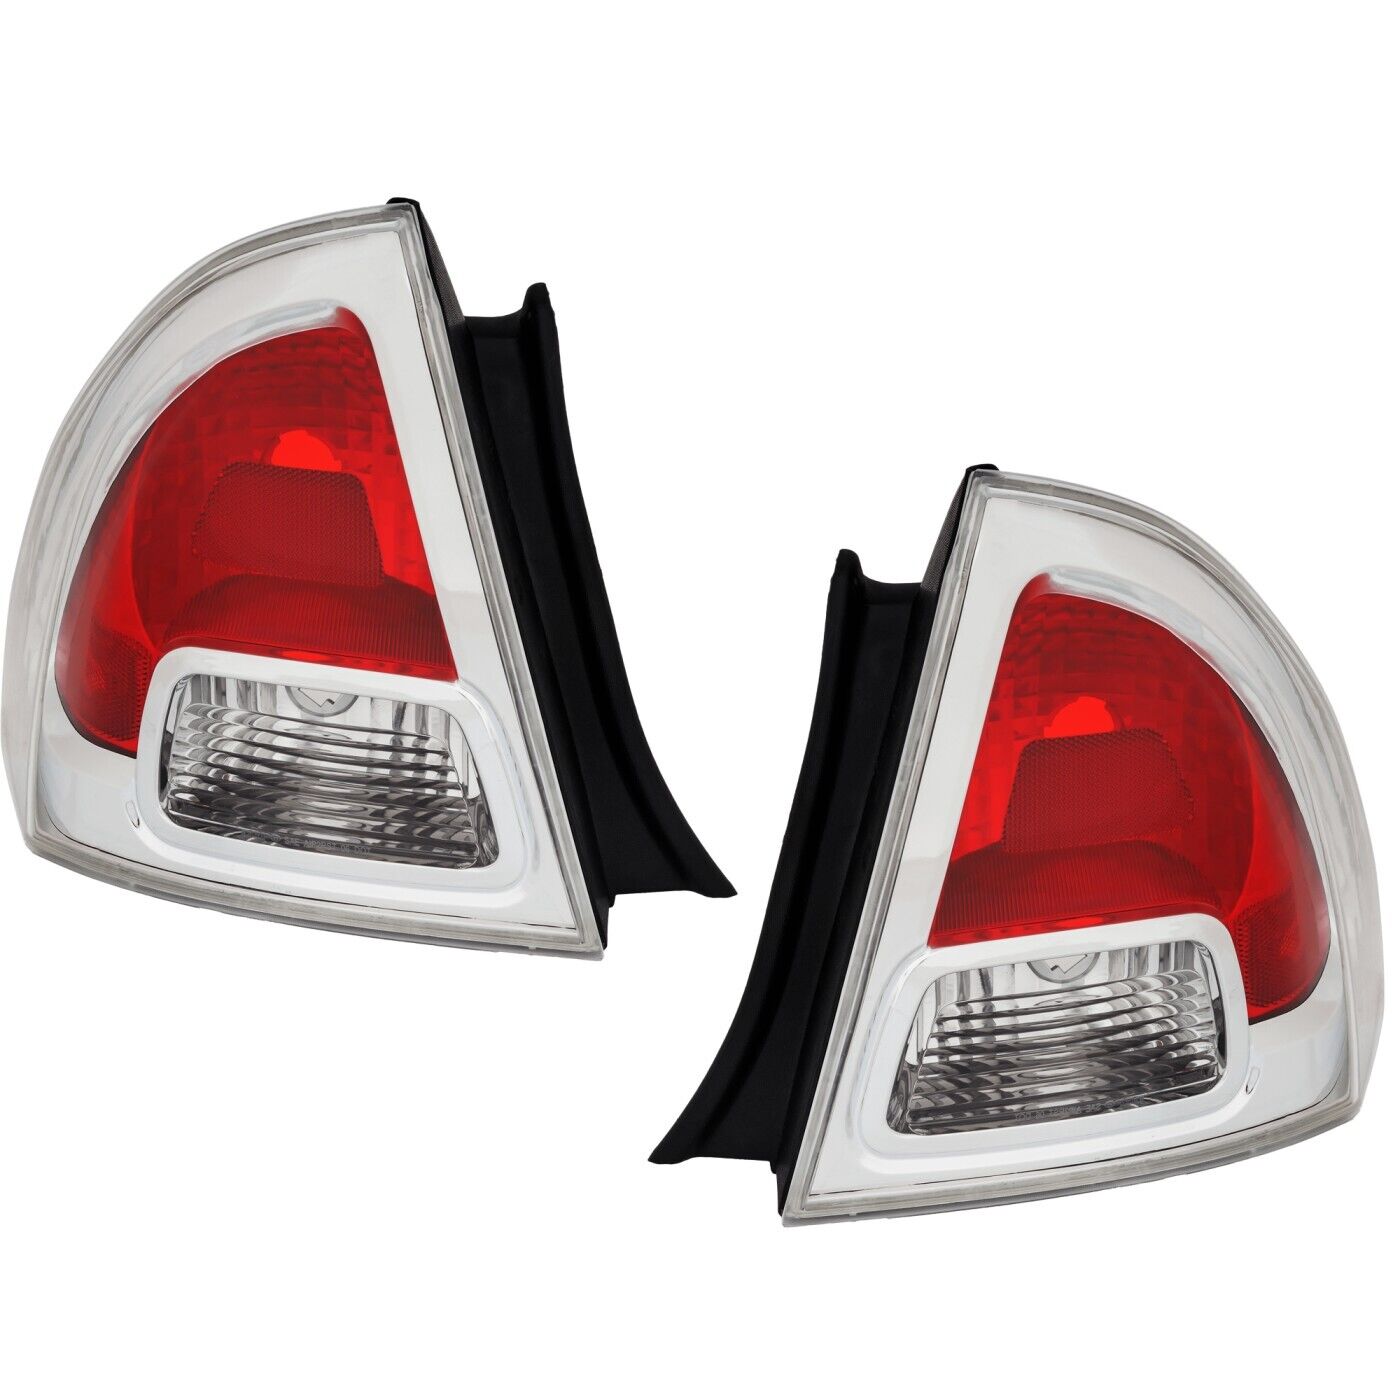 Set of 2 Tail Light For 2006-2009 Ford Fusion S LH & RH Clear & Red Lens